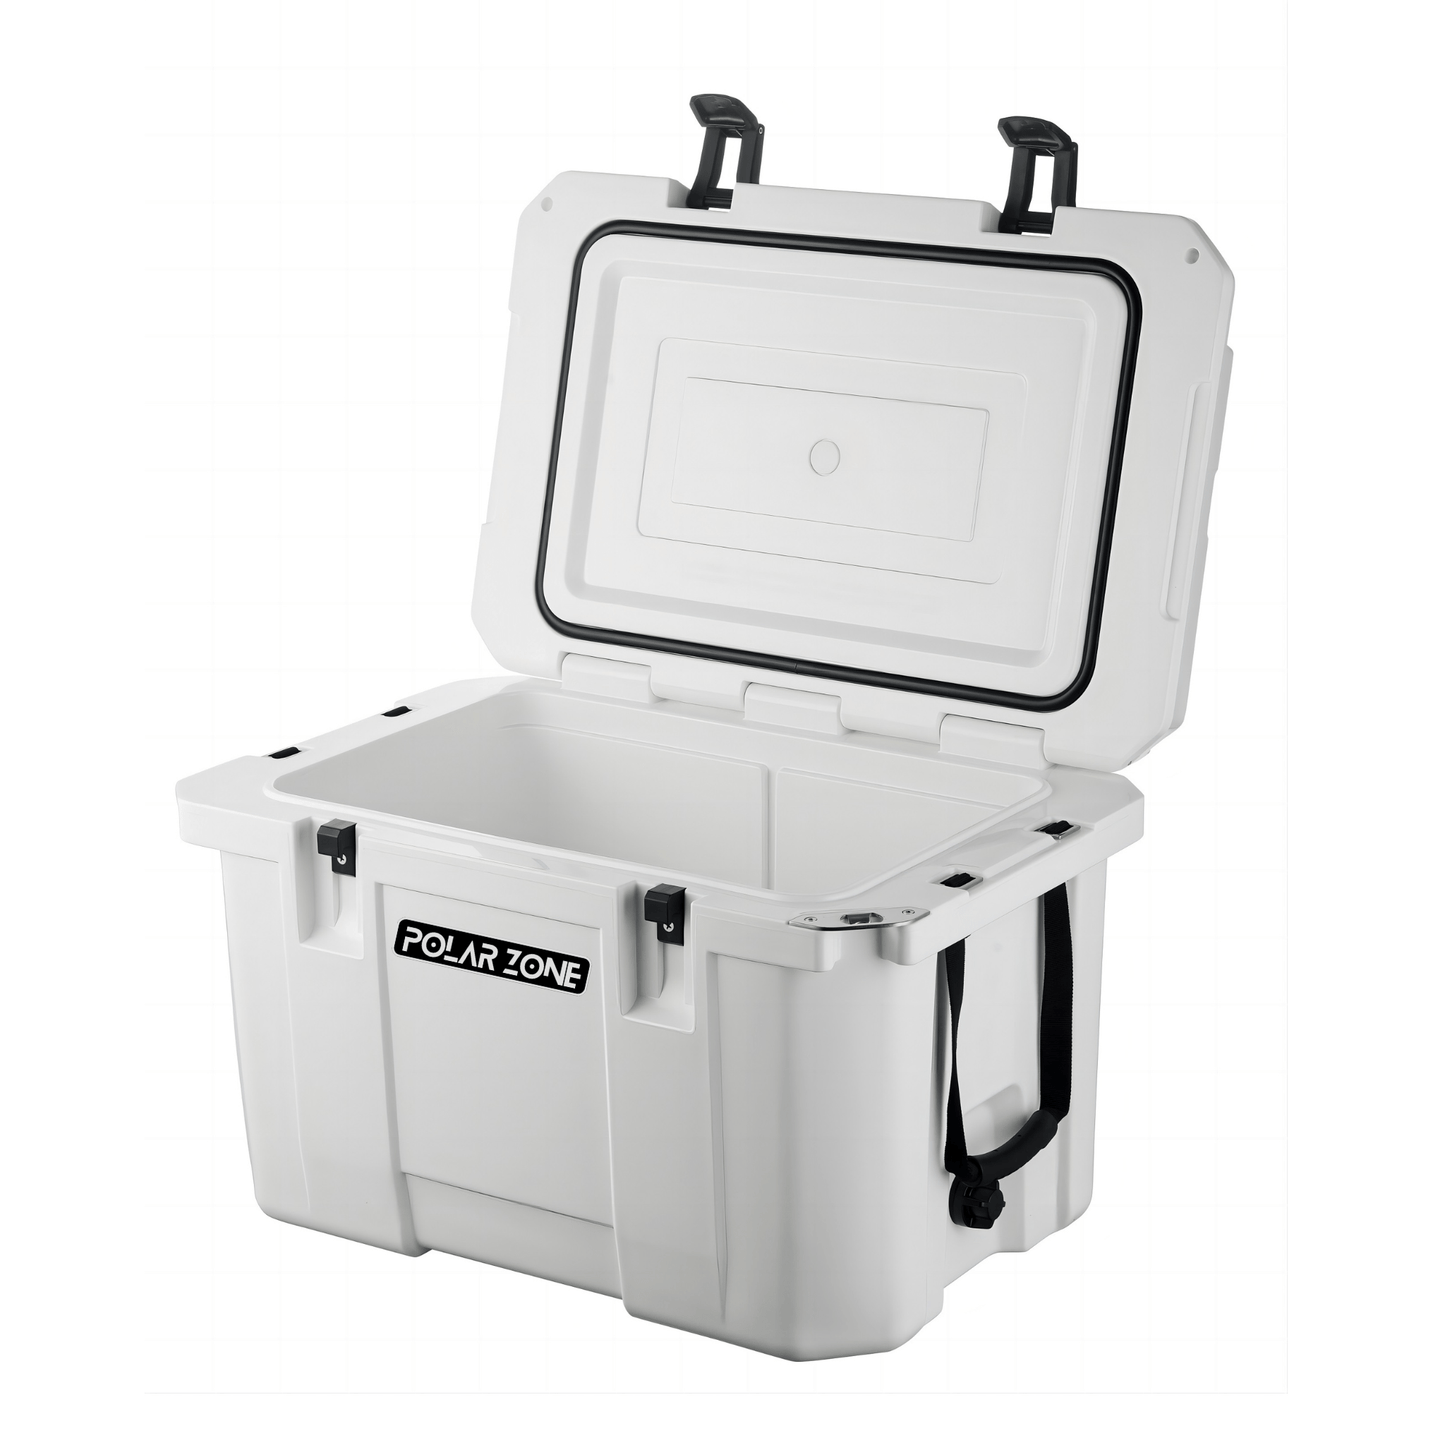 Polar Zone Hard Cooler for Camping, Fishing and Outdoor- Advent 55 Cooler Box